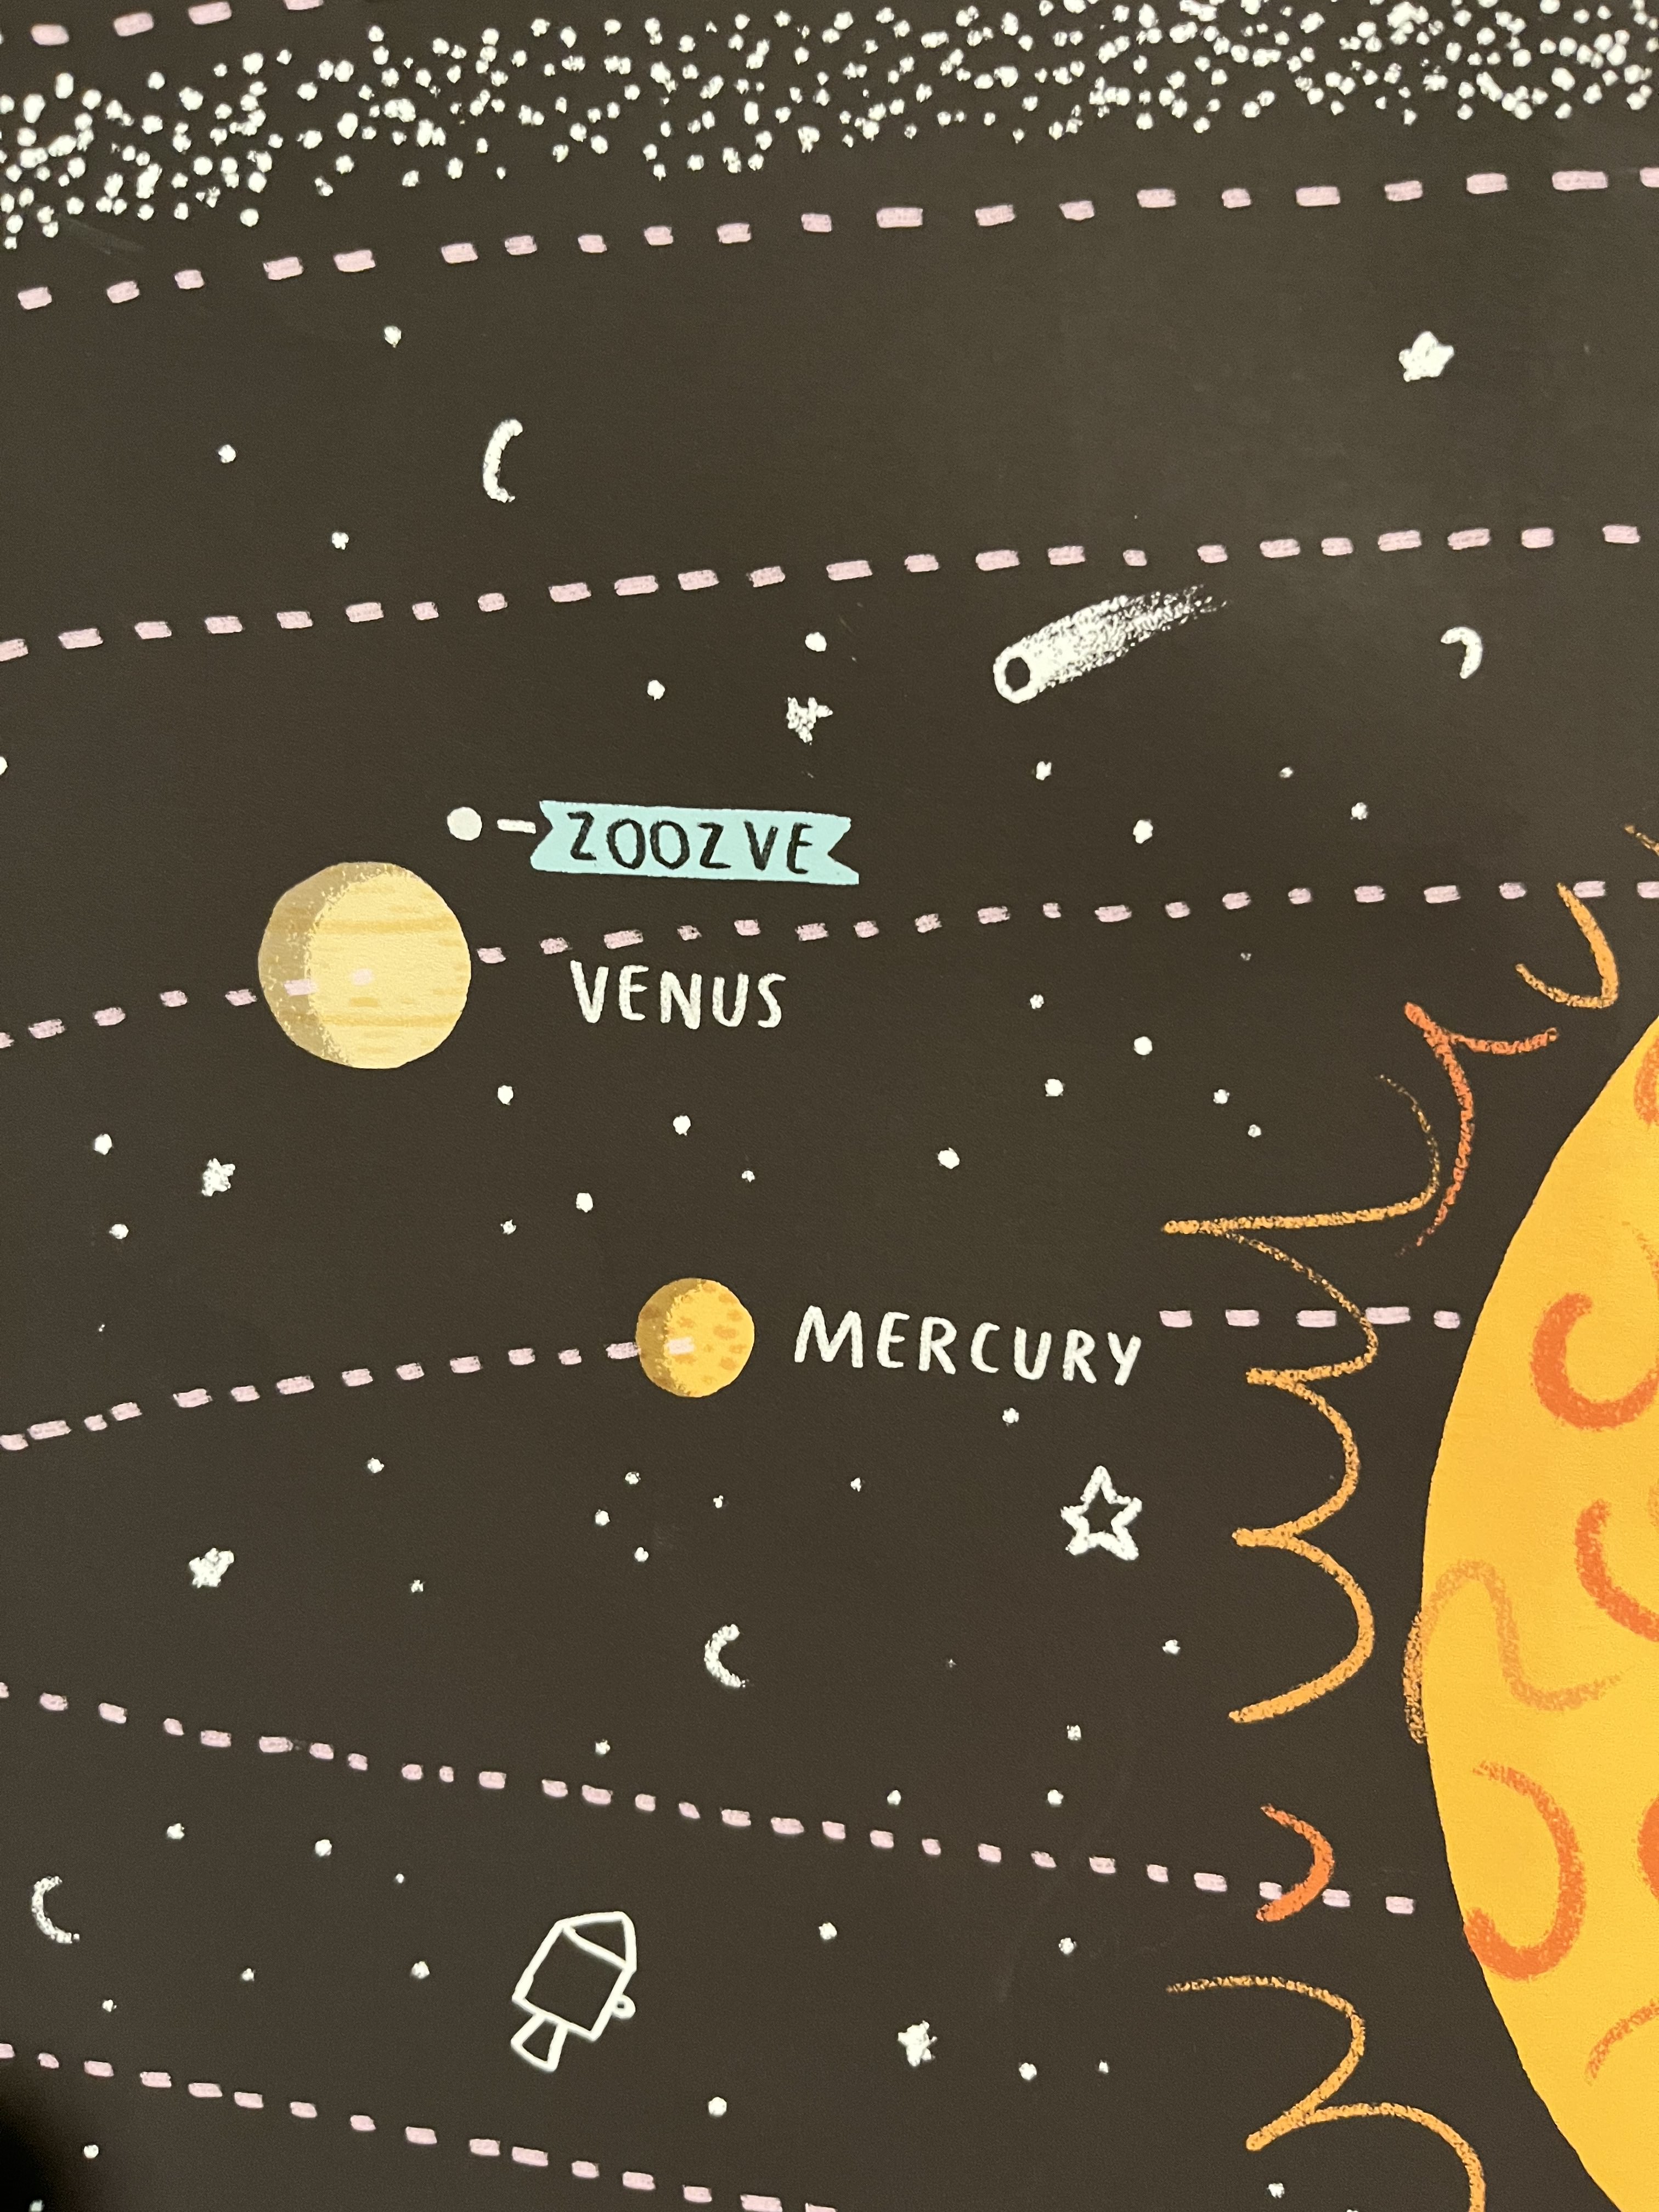 Close up of the poster. You see a bit of the sun on the right. Mercury going around the sun. Venus going around the sun behind it.  Next to Venus a dot with a label: ZOOZVE.